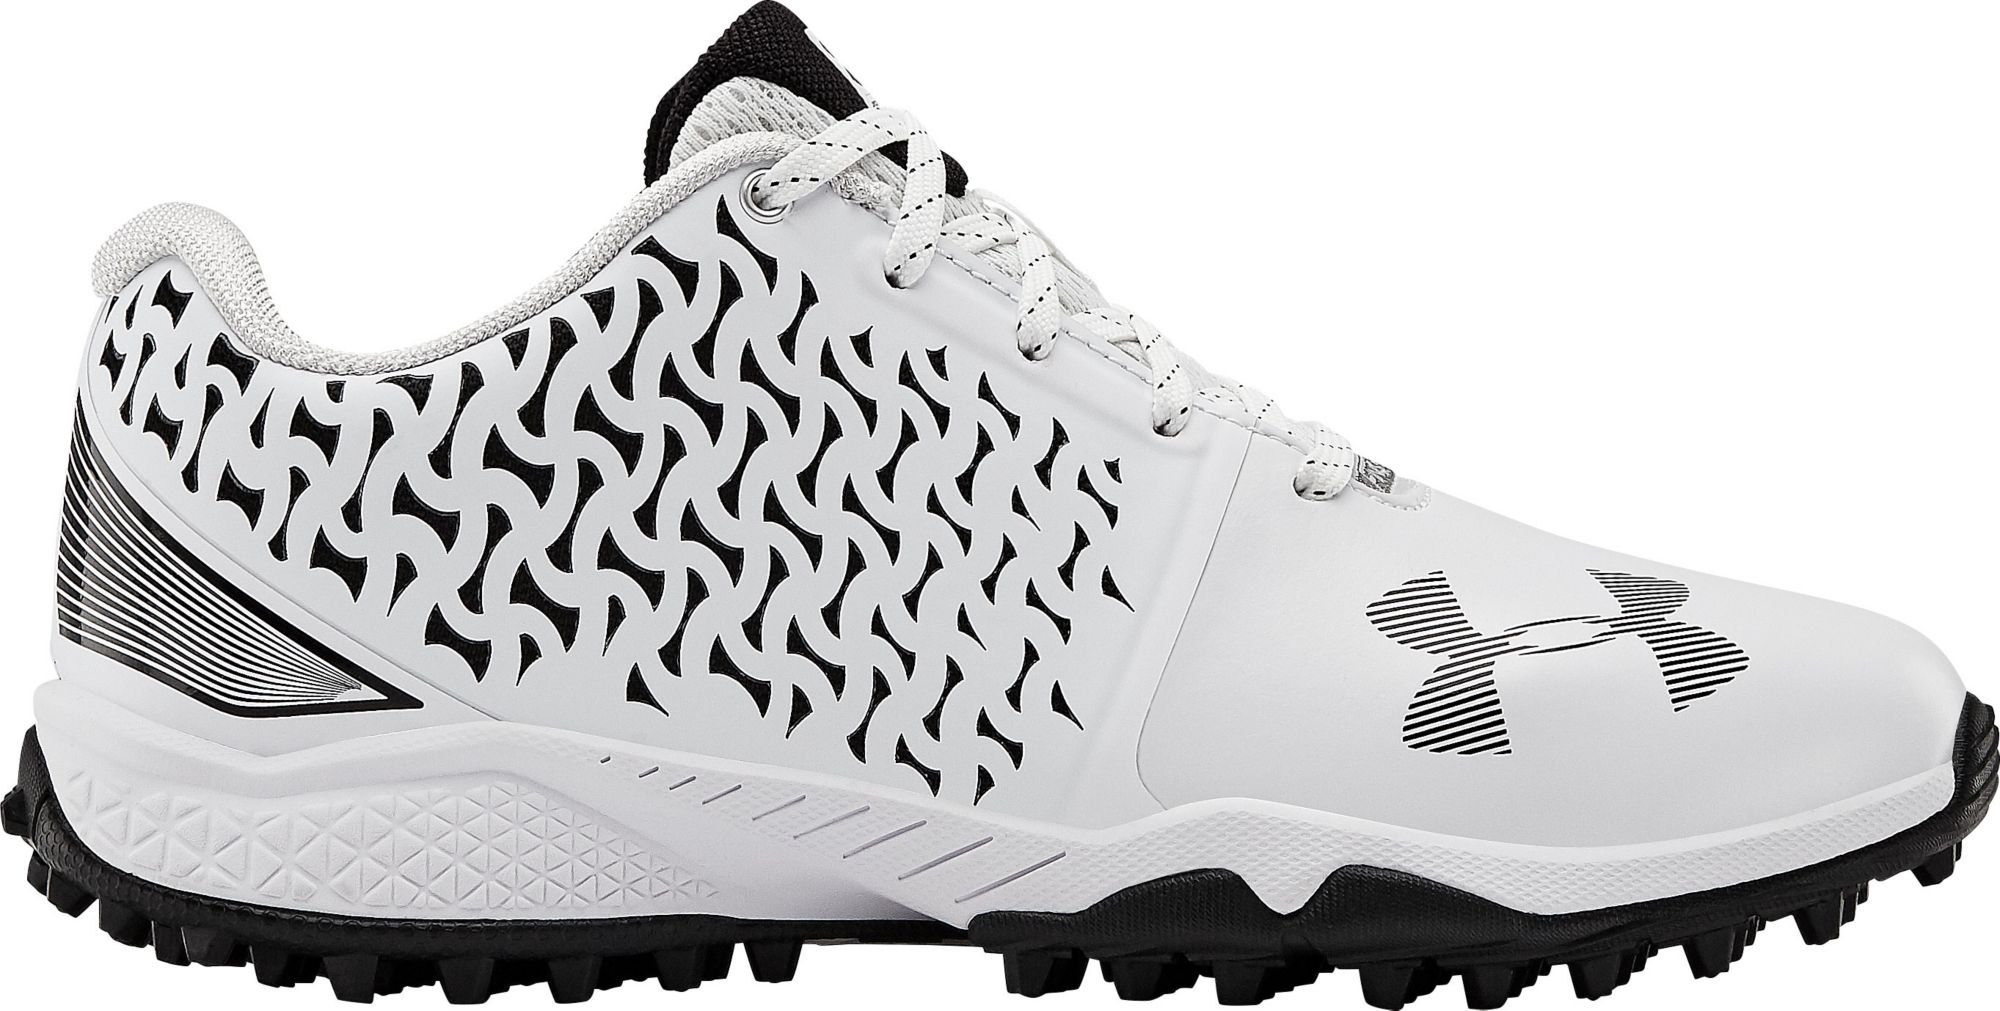 under armor turf shoes